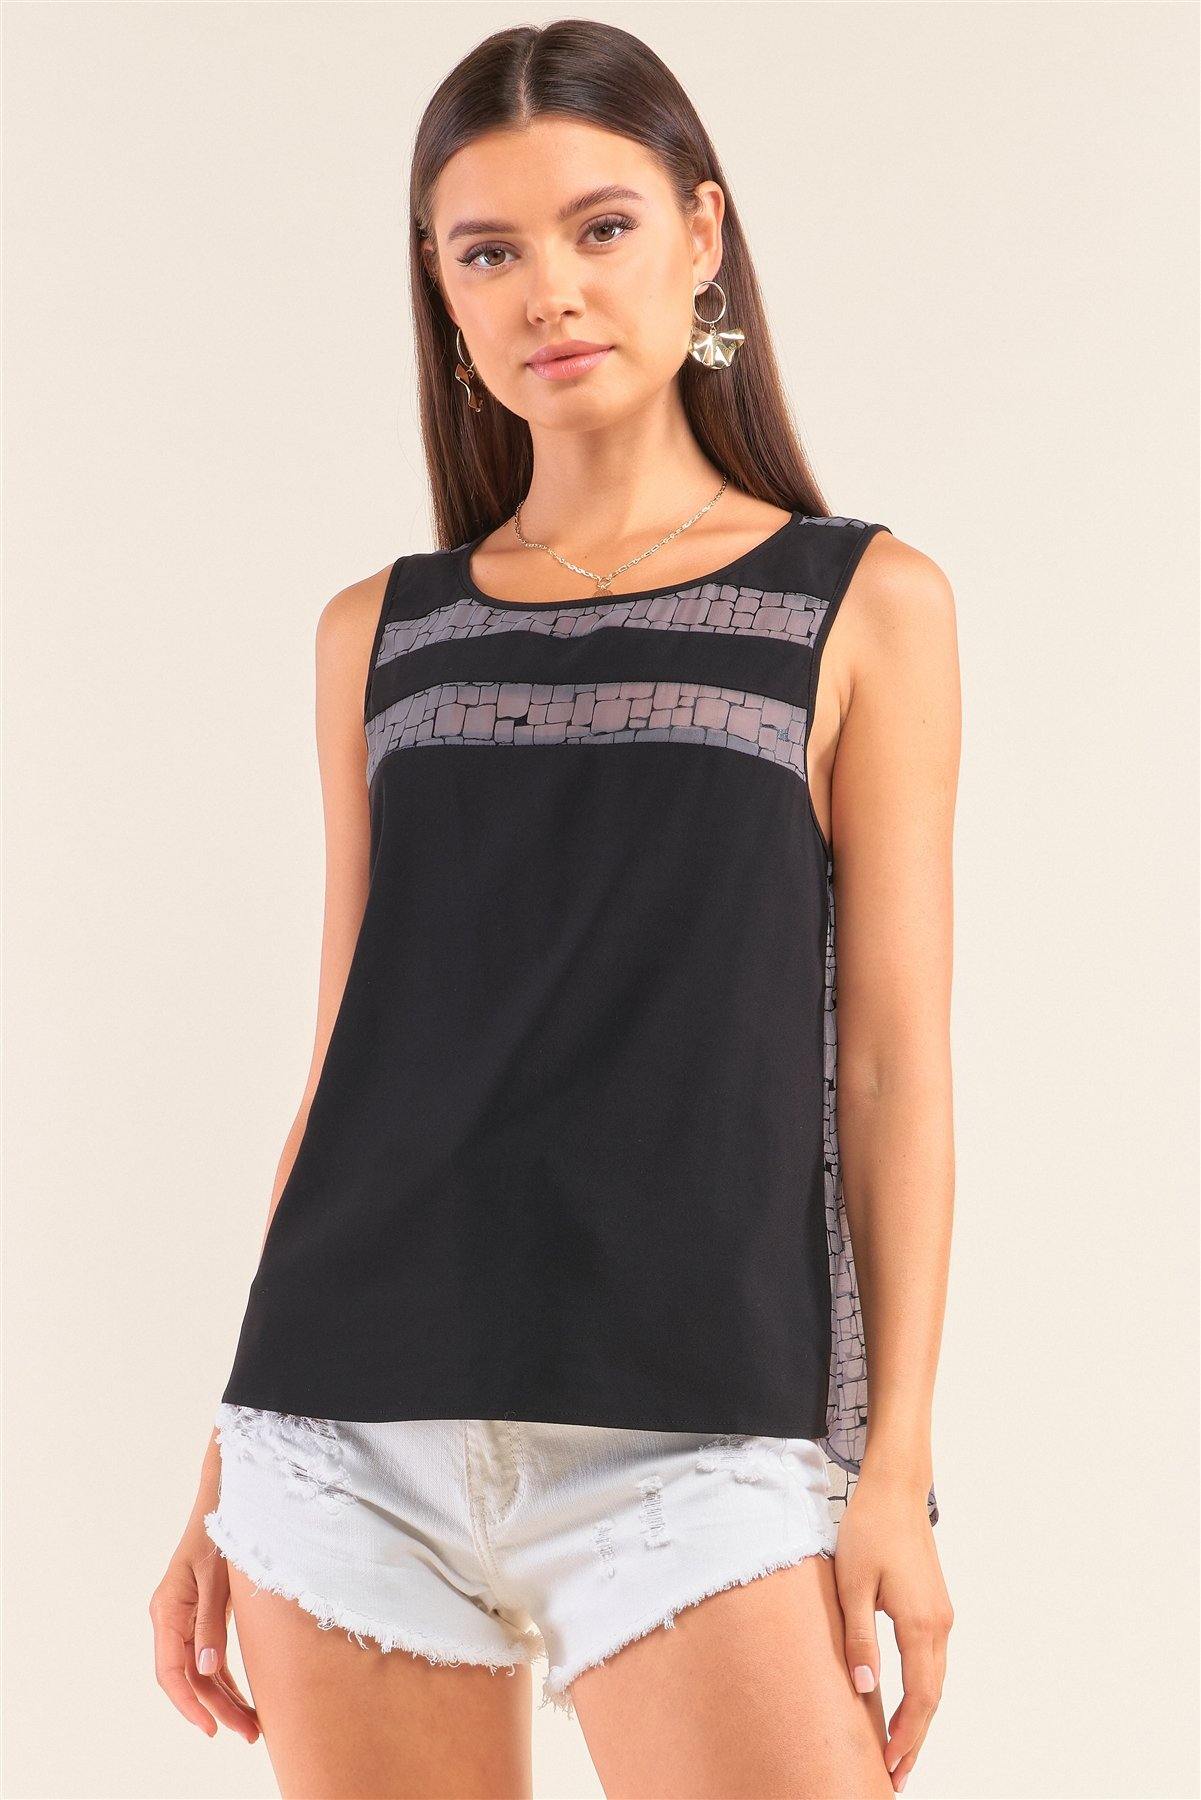 Grey And Black Sleeveless Relaxed Fit Brick Pattern Print Mesh Round Neck Top - Pearlara